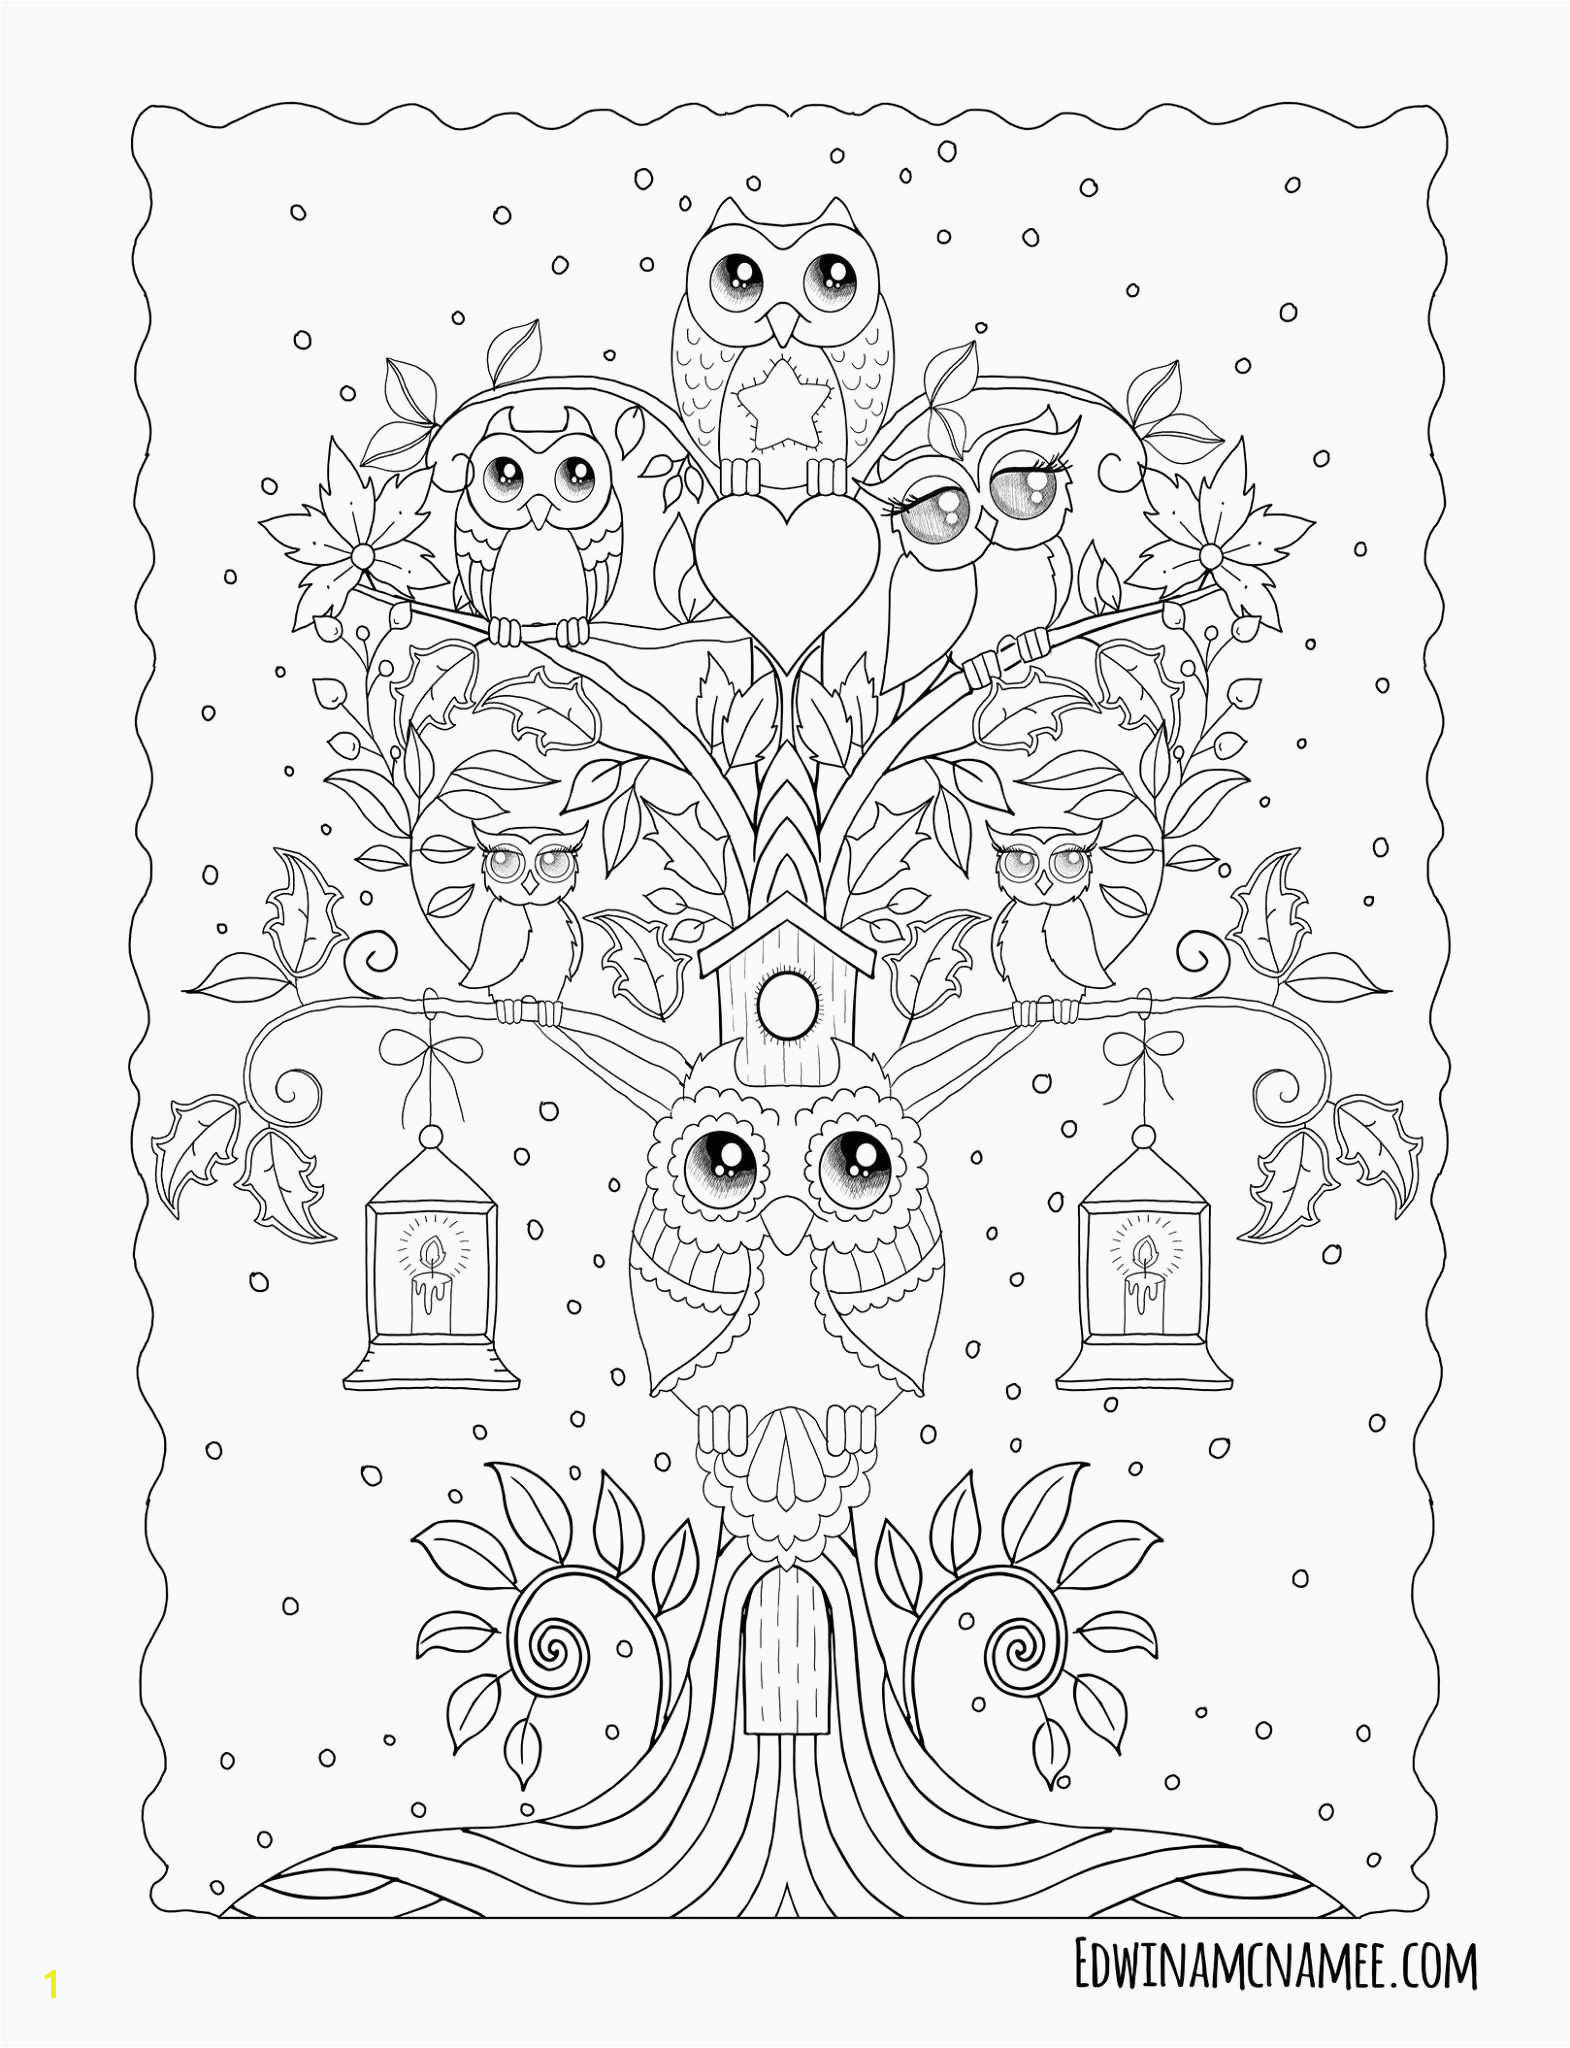 Advanced Coloring Pages Of Animals Paisley Coloring Pages Best Advanced Coloring Pages Fresh Paisley